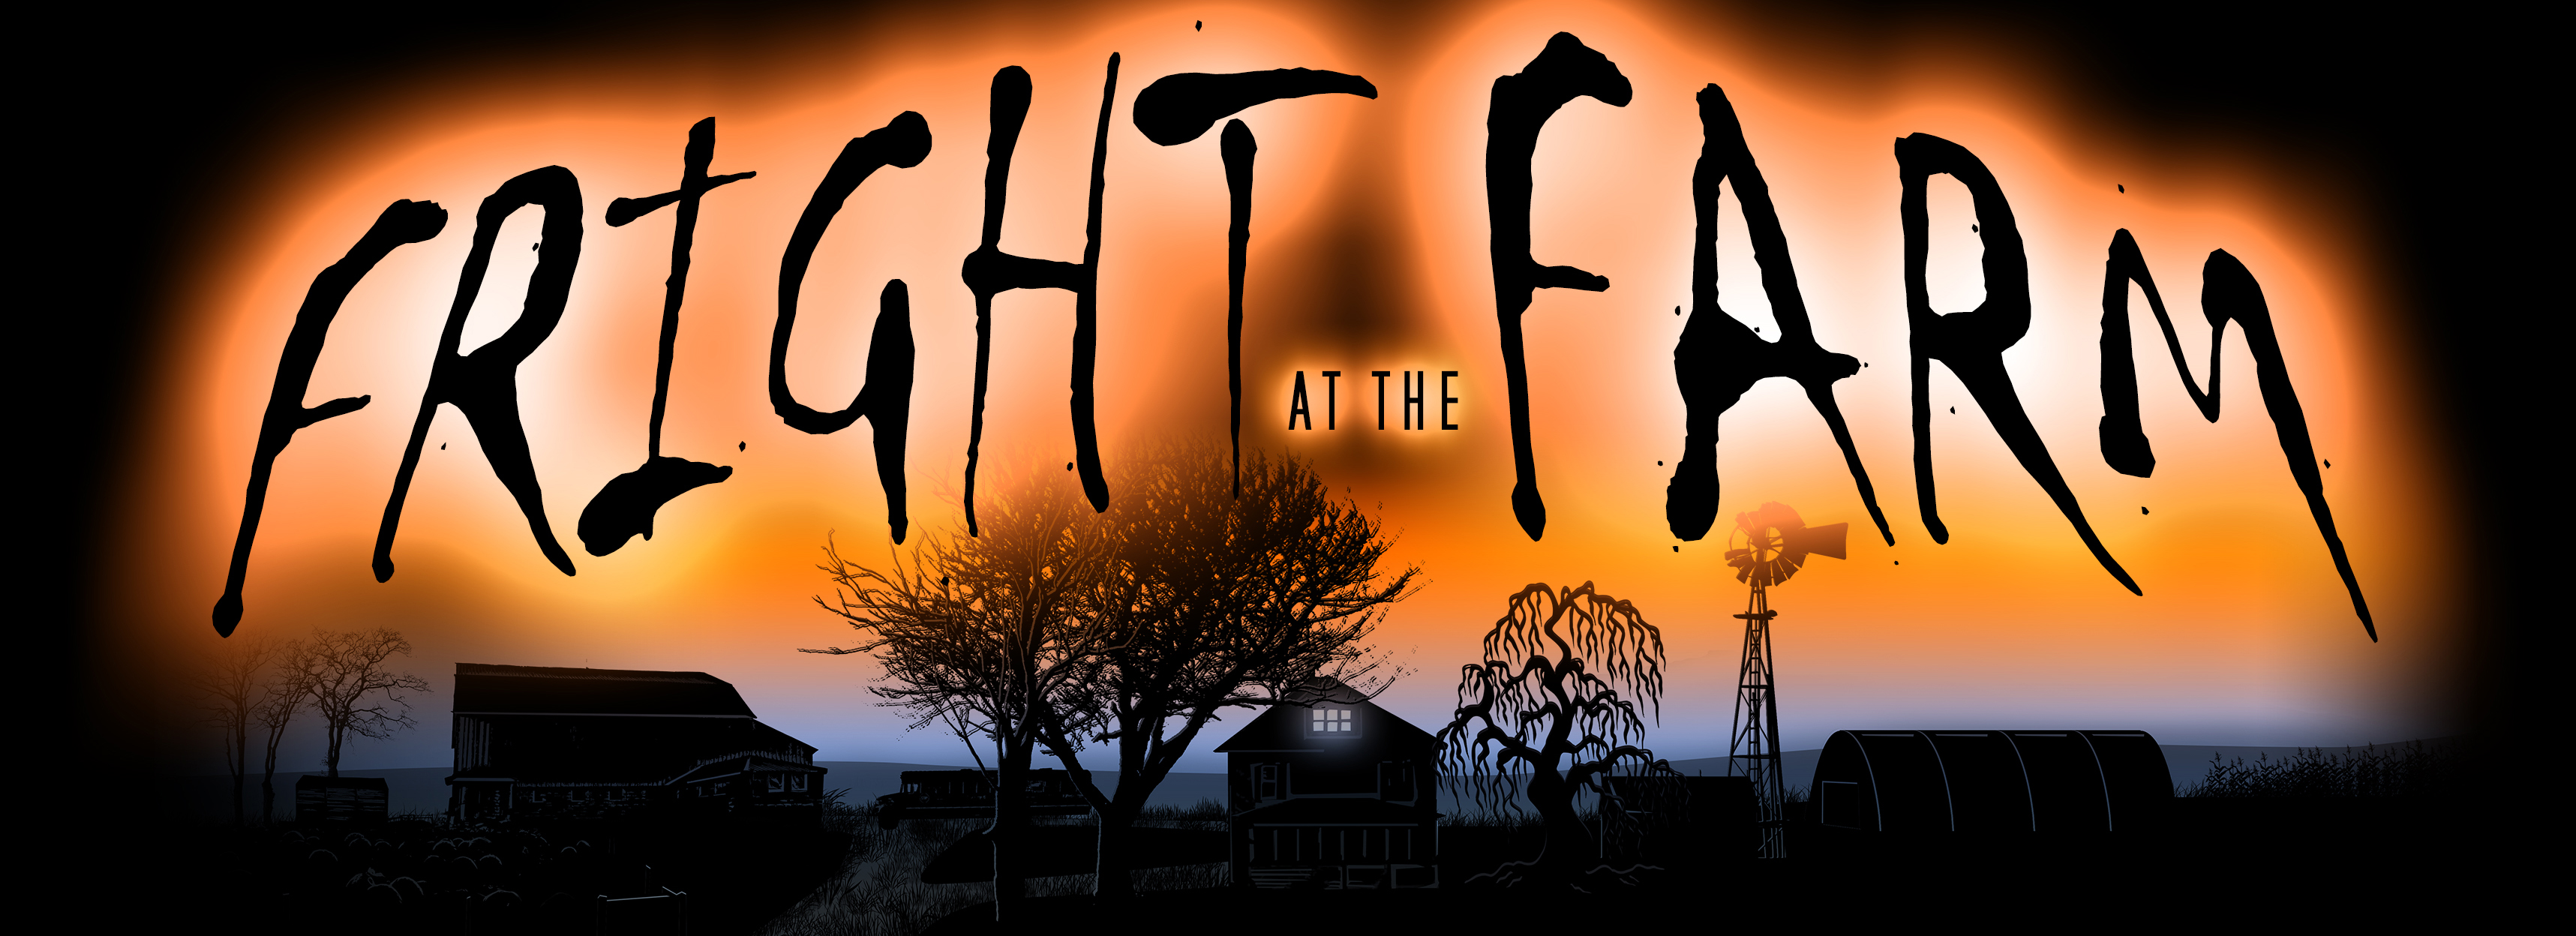 Fright at the Farm haunted house in Minnesota